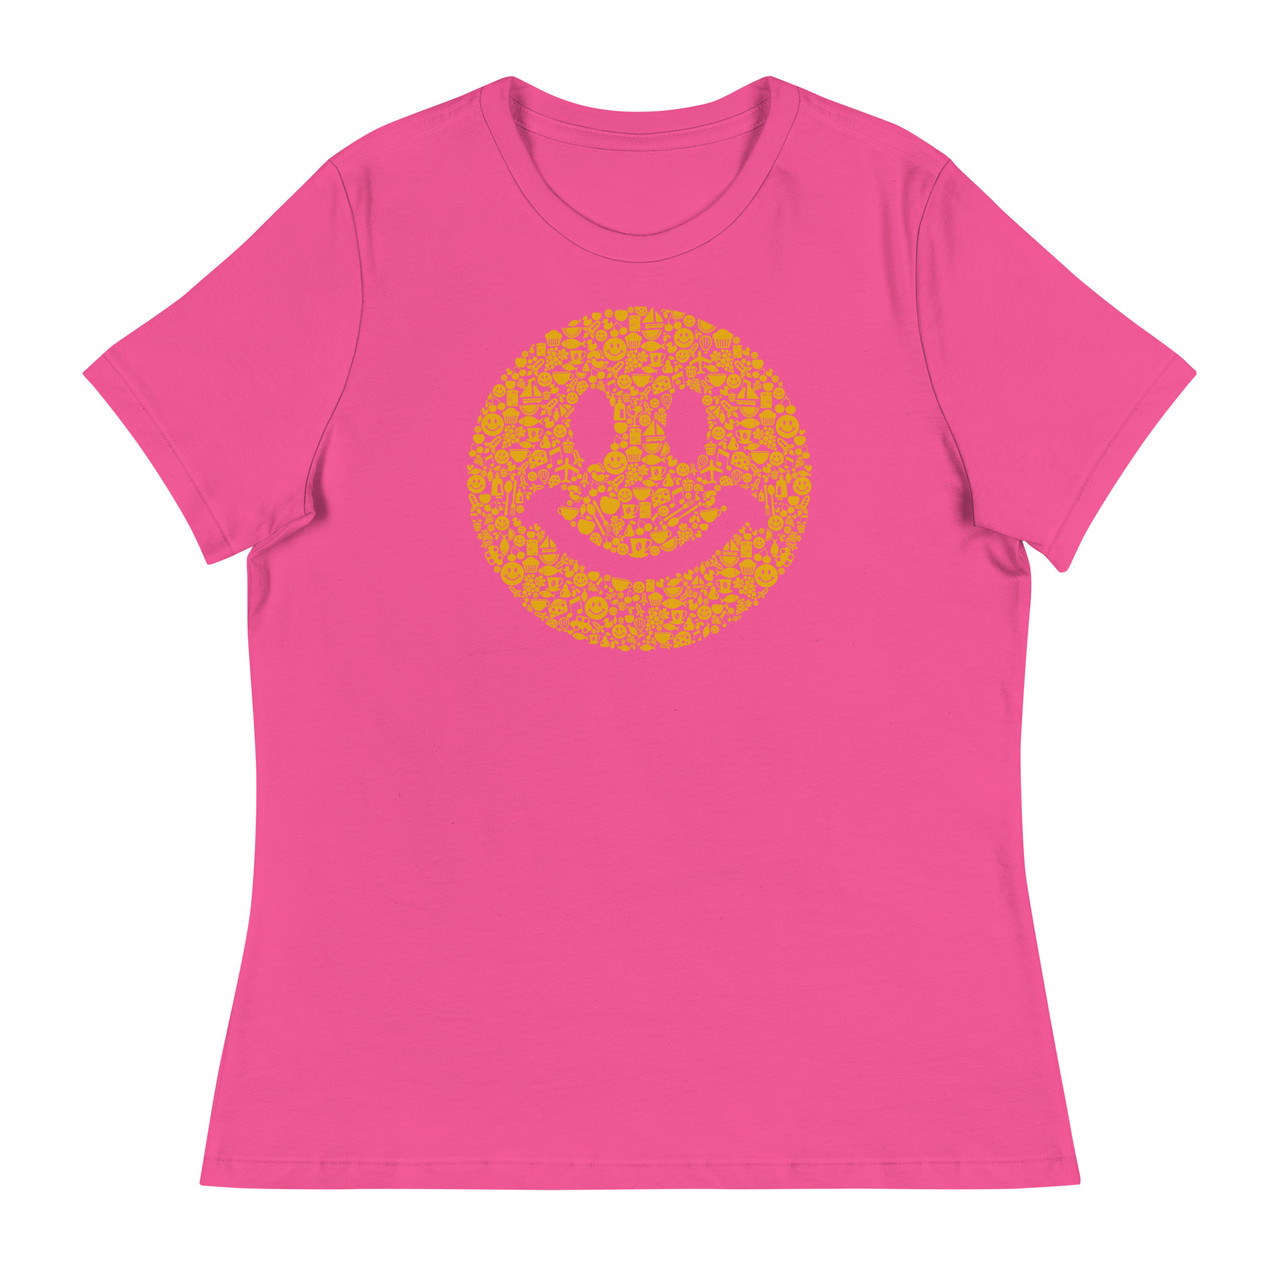 Smile Within A Smile Women's Relaxed T-Shirt - Bella + Canvas 6400 